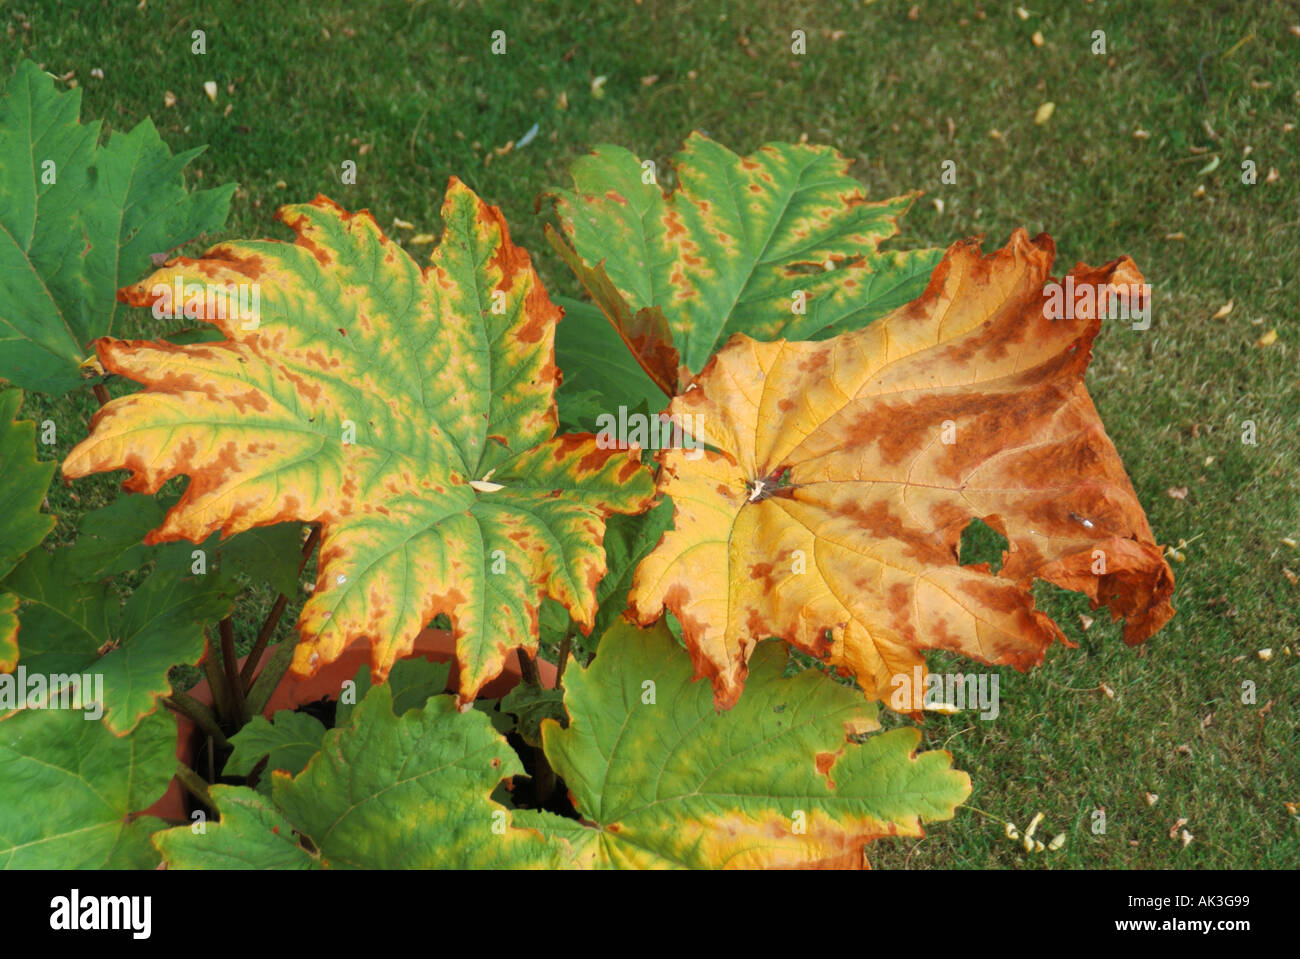 Rheum Ornamental Rhubarb Polygonaceae plant growing in garden showing autumnal colours on large leaves Stock Photo